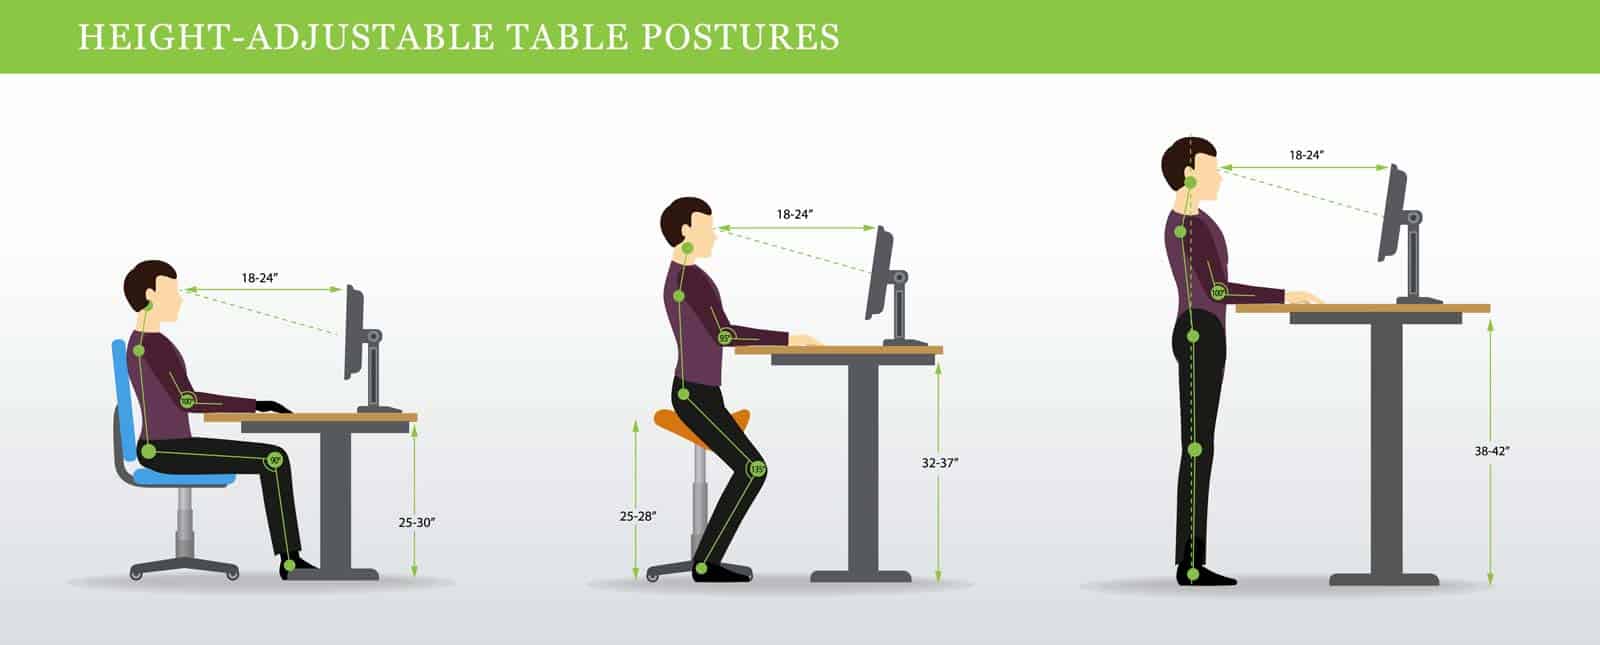 How Do I Position My Screen And Keypad When Using A Standing Desk?